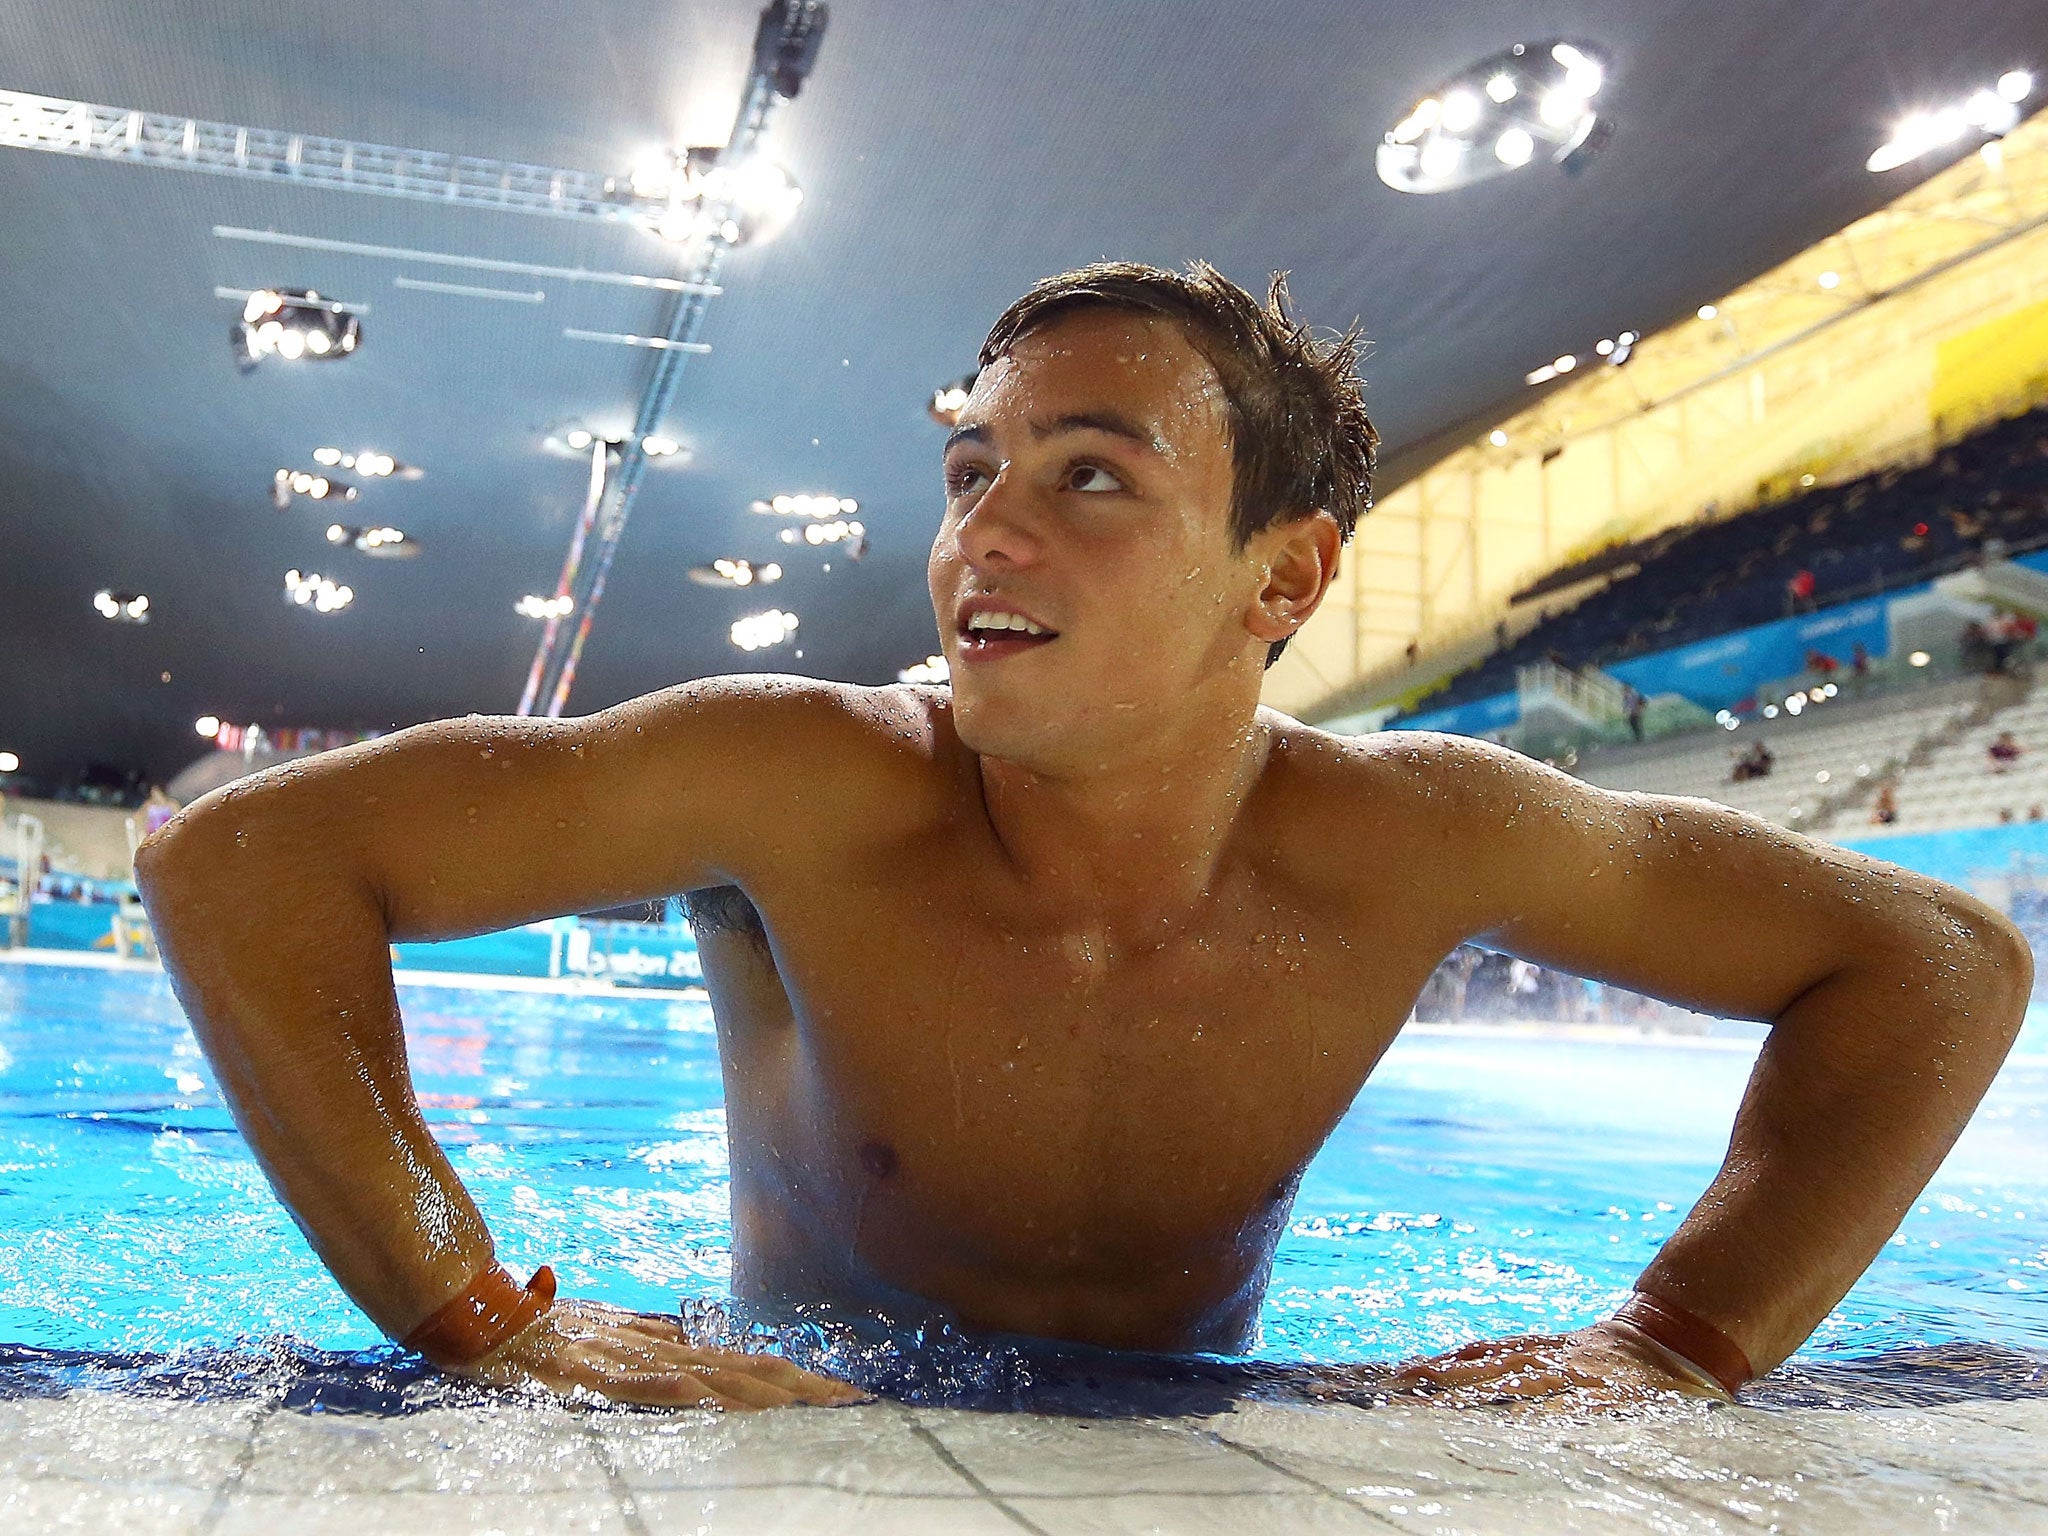 Tom Daley says his whole world has changed